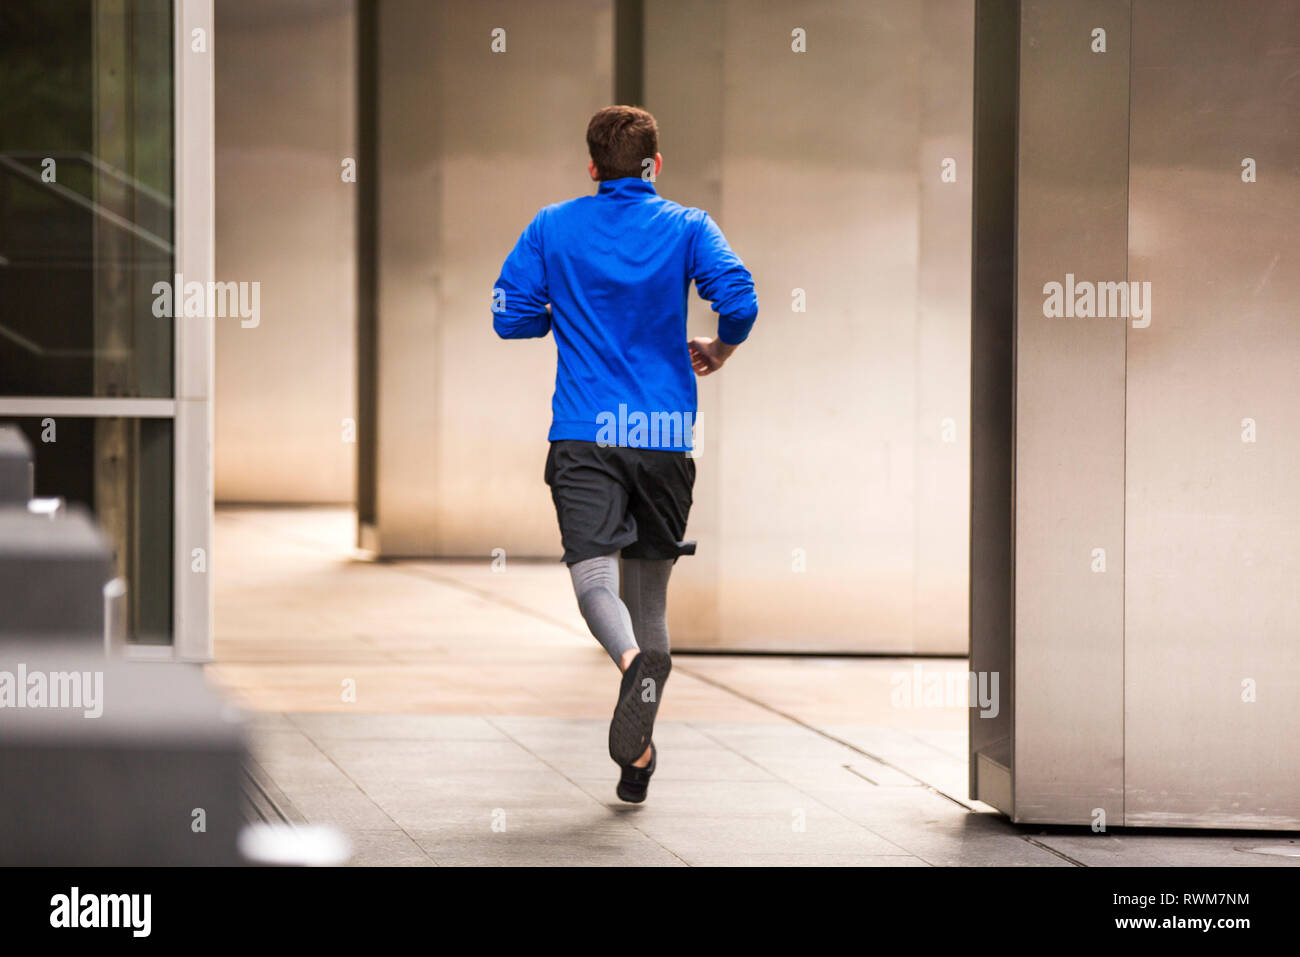 Young runner jogging on pavement, London, UK Stock Photo